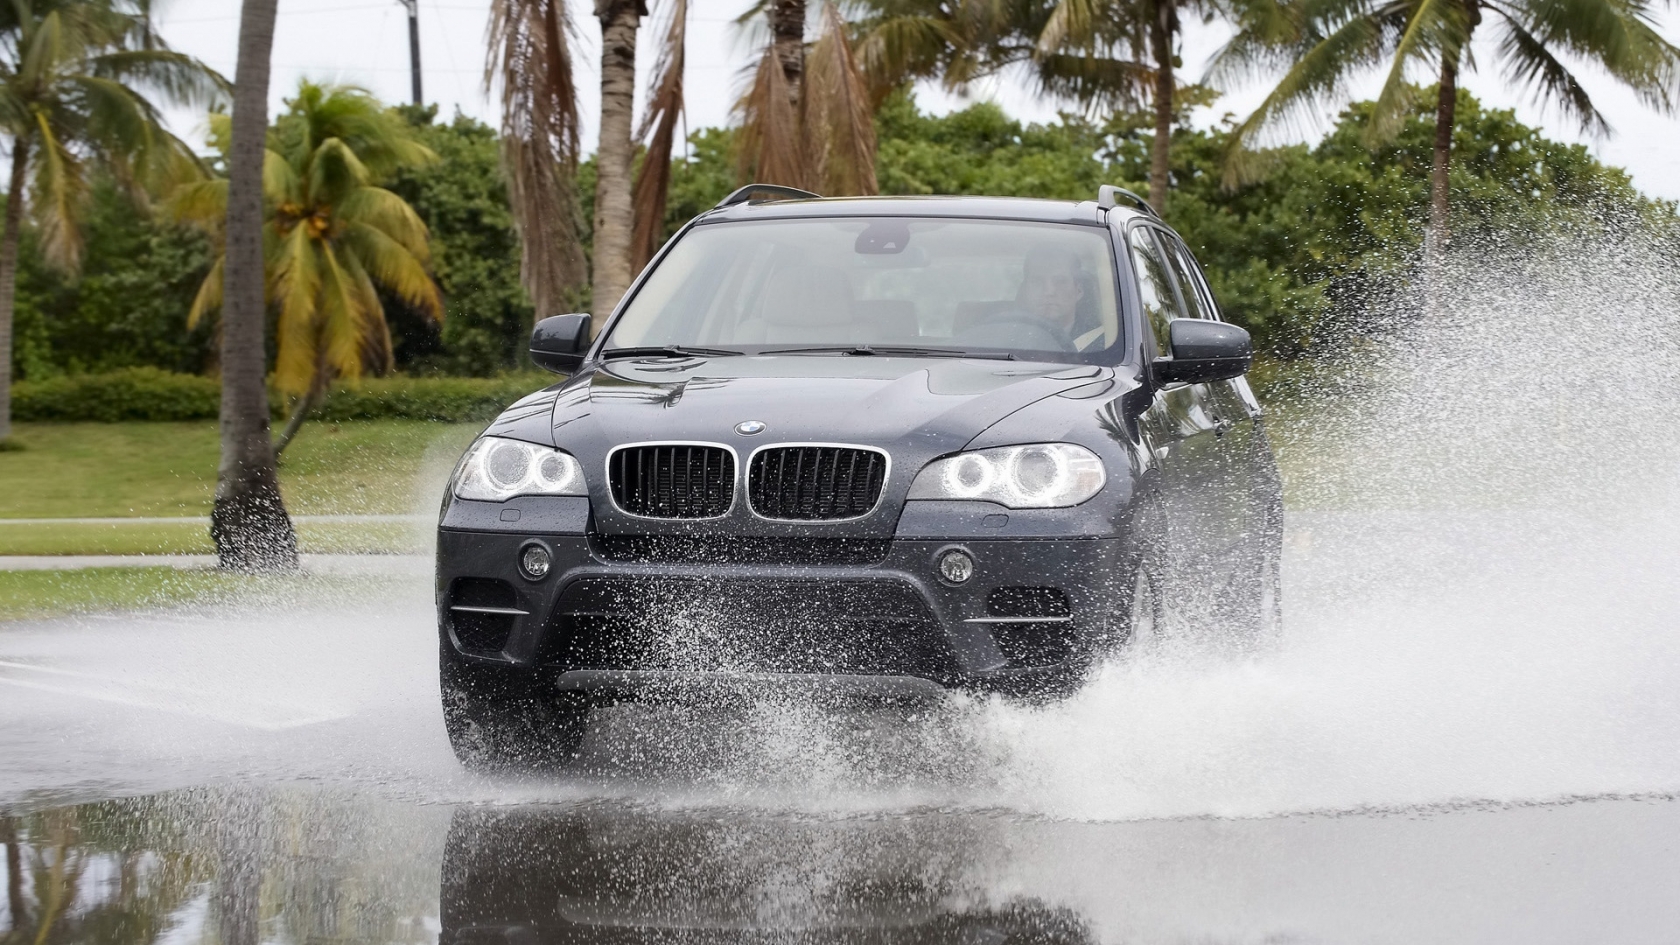 BMW X5 Water 2010 for 1680 x 945 HDTV resolution